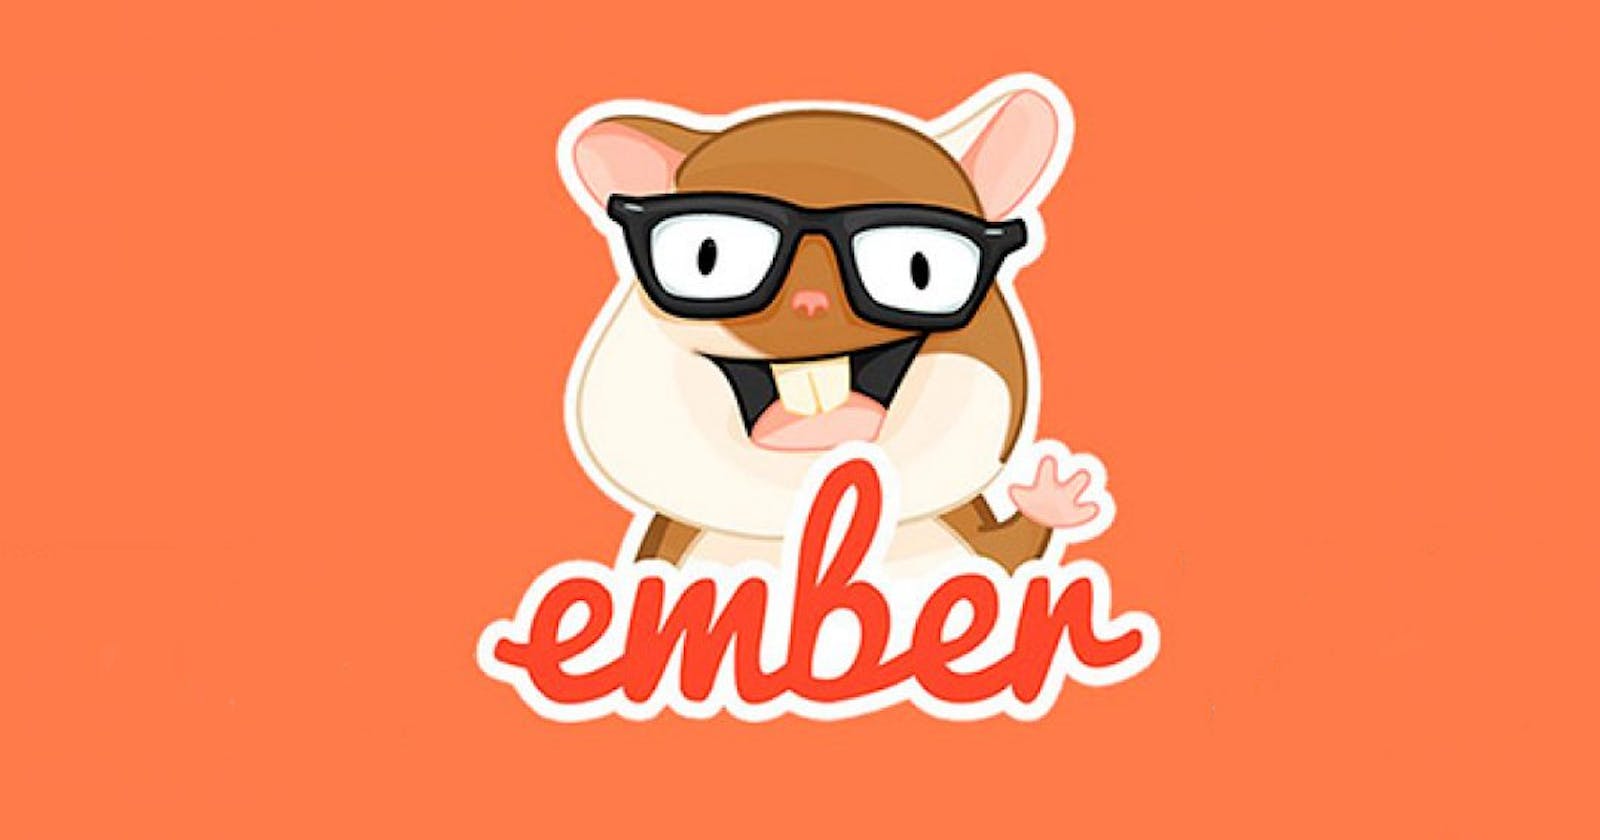 Ember.js basics and how it compares to other JavaScript frameworks